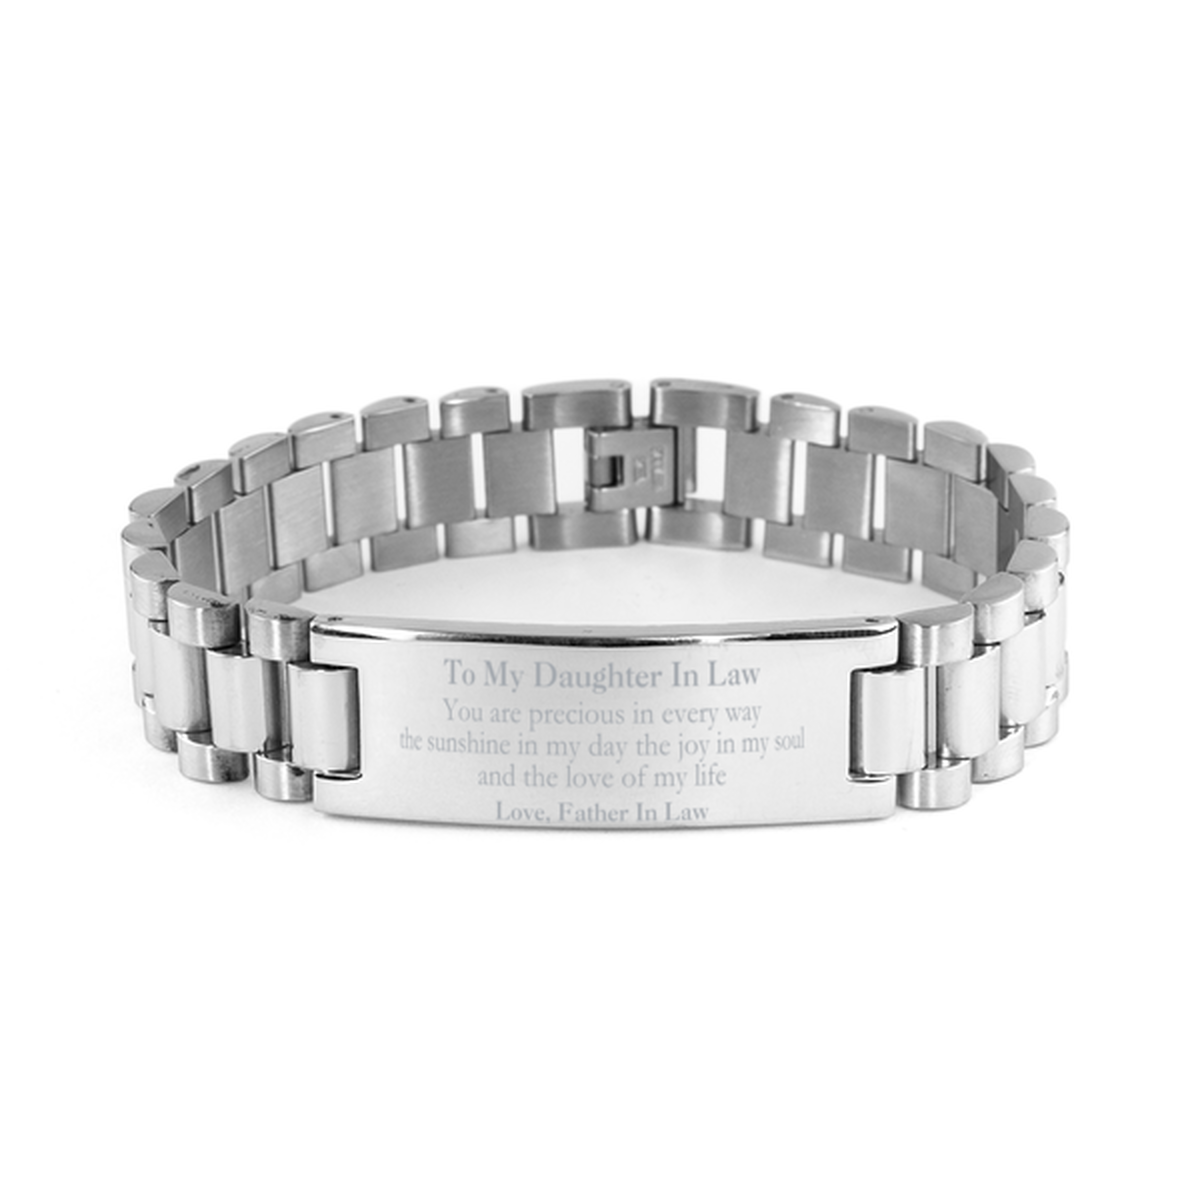 Graduation Gifts for Daughter In Law Ladder Stainless Steel Bracelet Present from Father In Law, Christmas Daughter In Law Birthday Gifts Daughter In Law You are precious in every way the sunshine in my day. Love, Father In Law